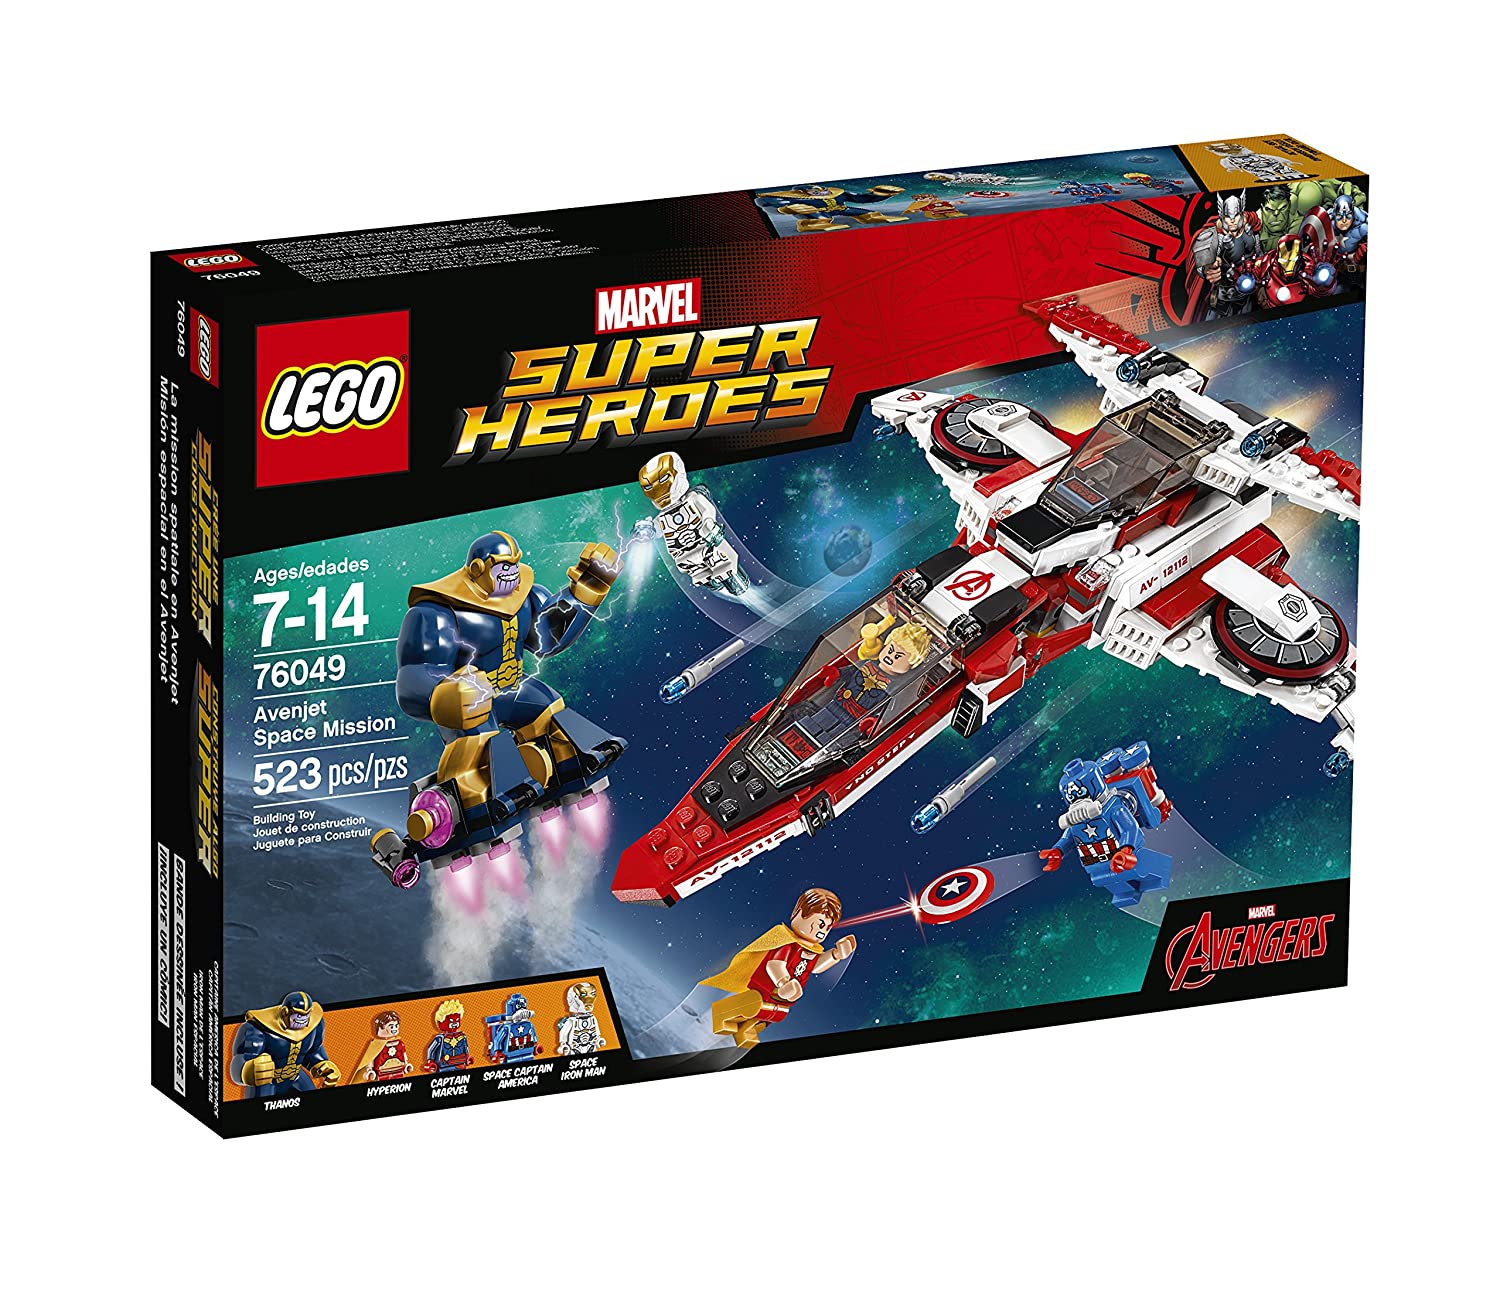 Top 9 Best LEGO Captain America Sets Reviews in 2022 8